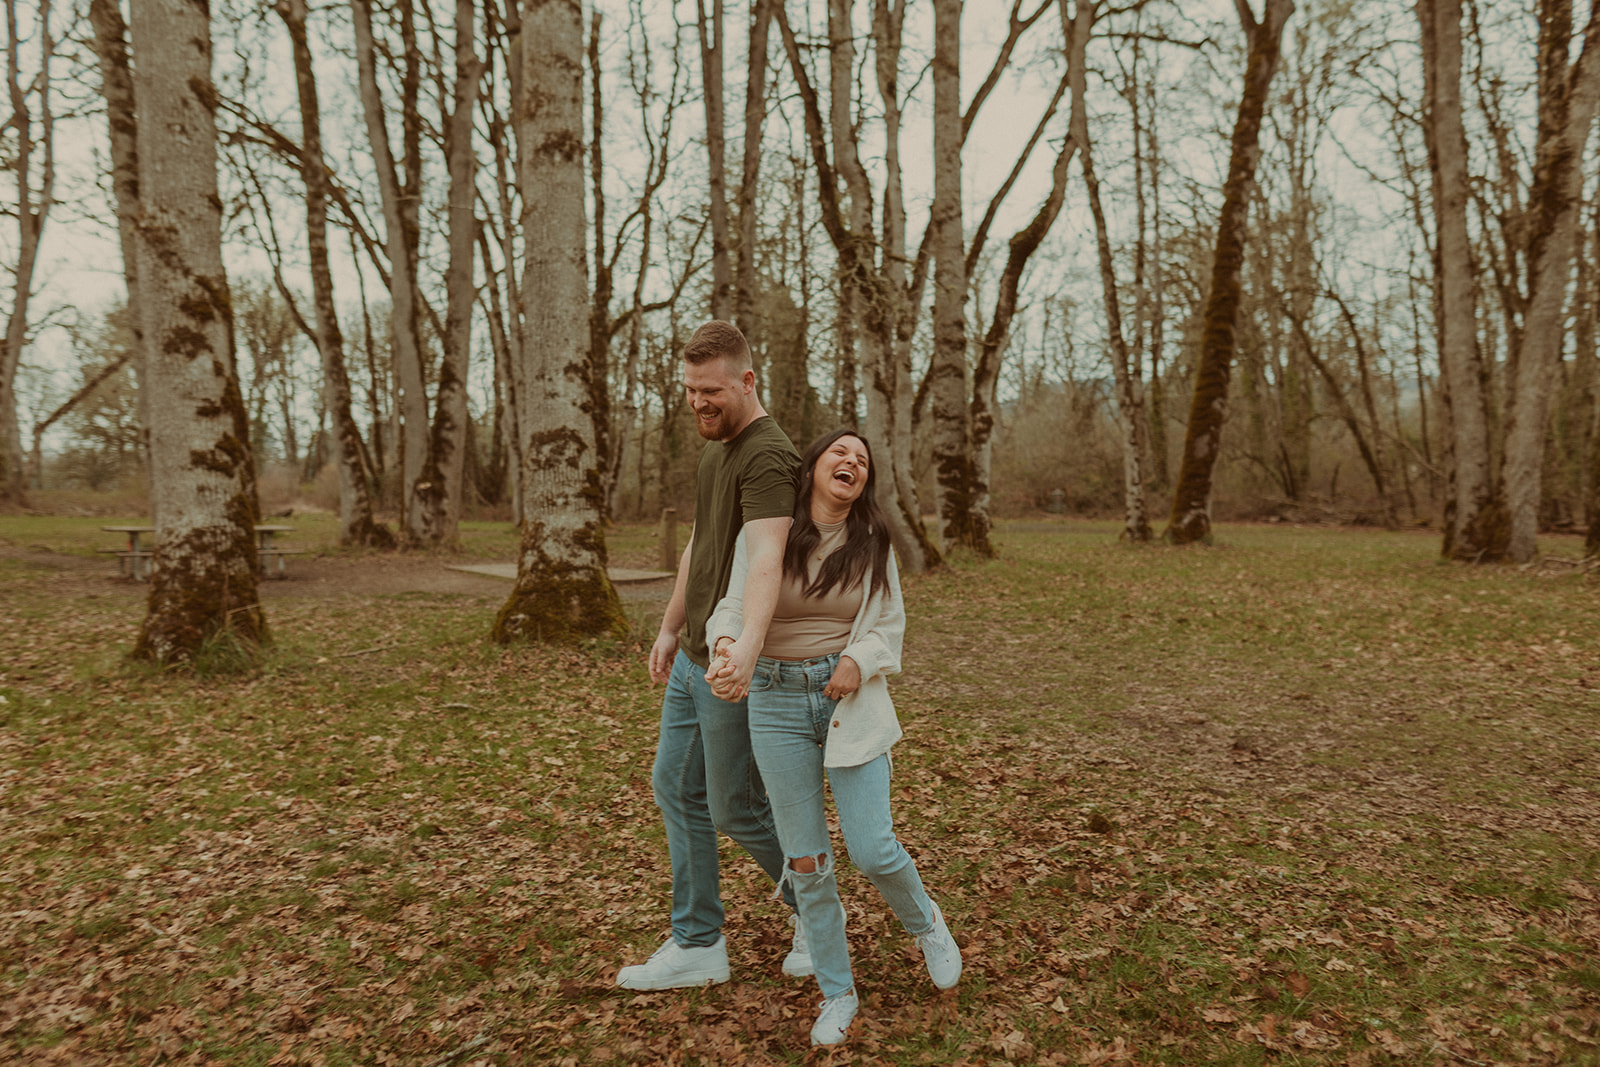 Engagement Photos done at Champoeg State Park in Yamhill County, Oregon